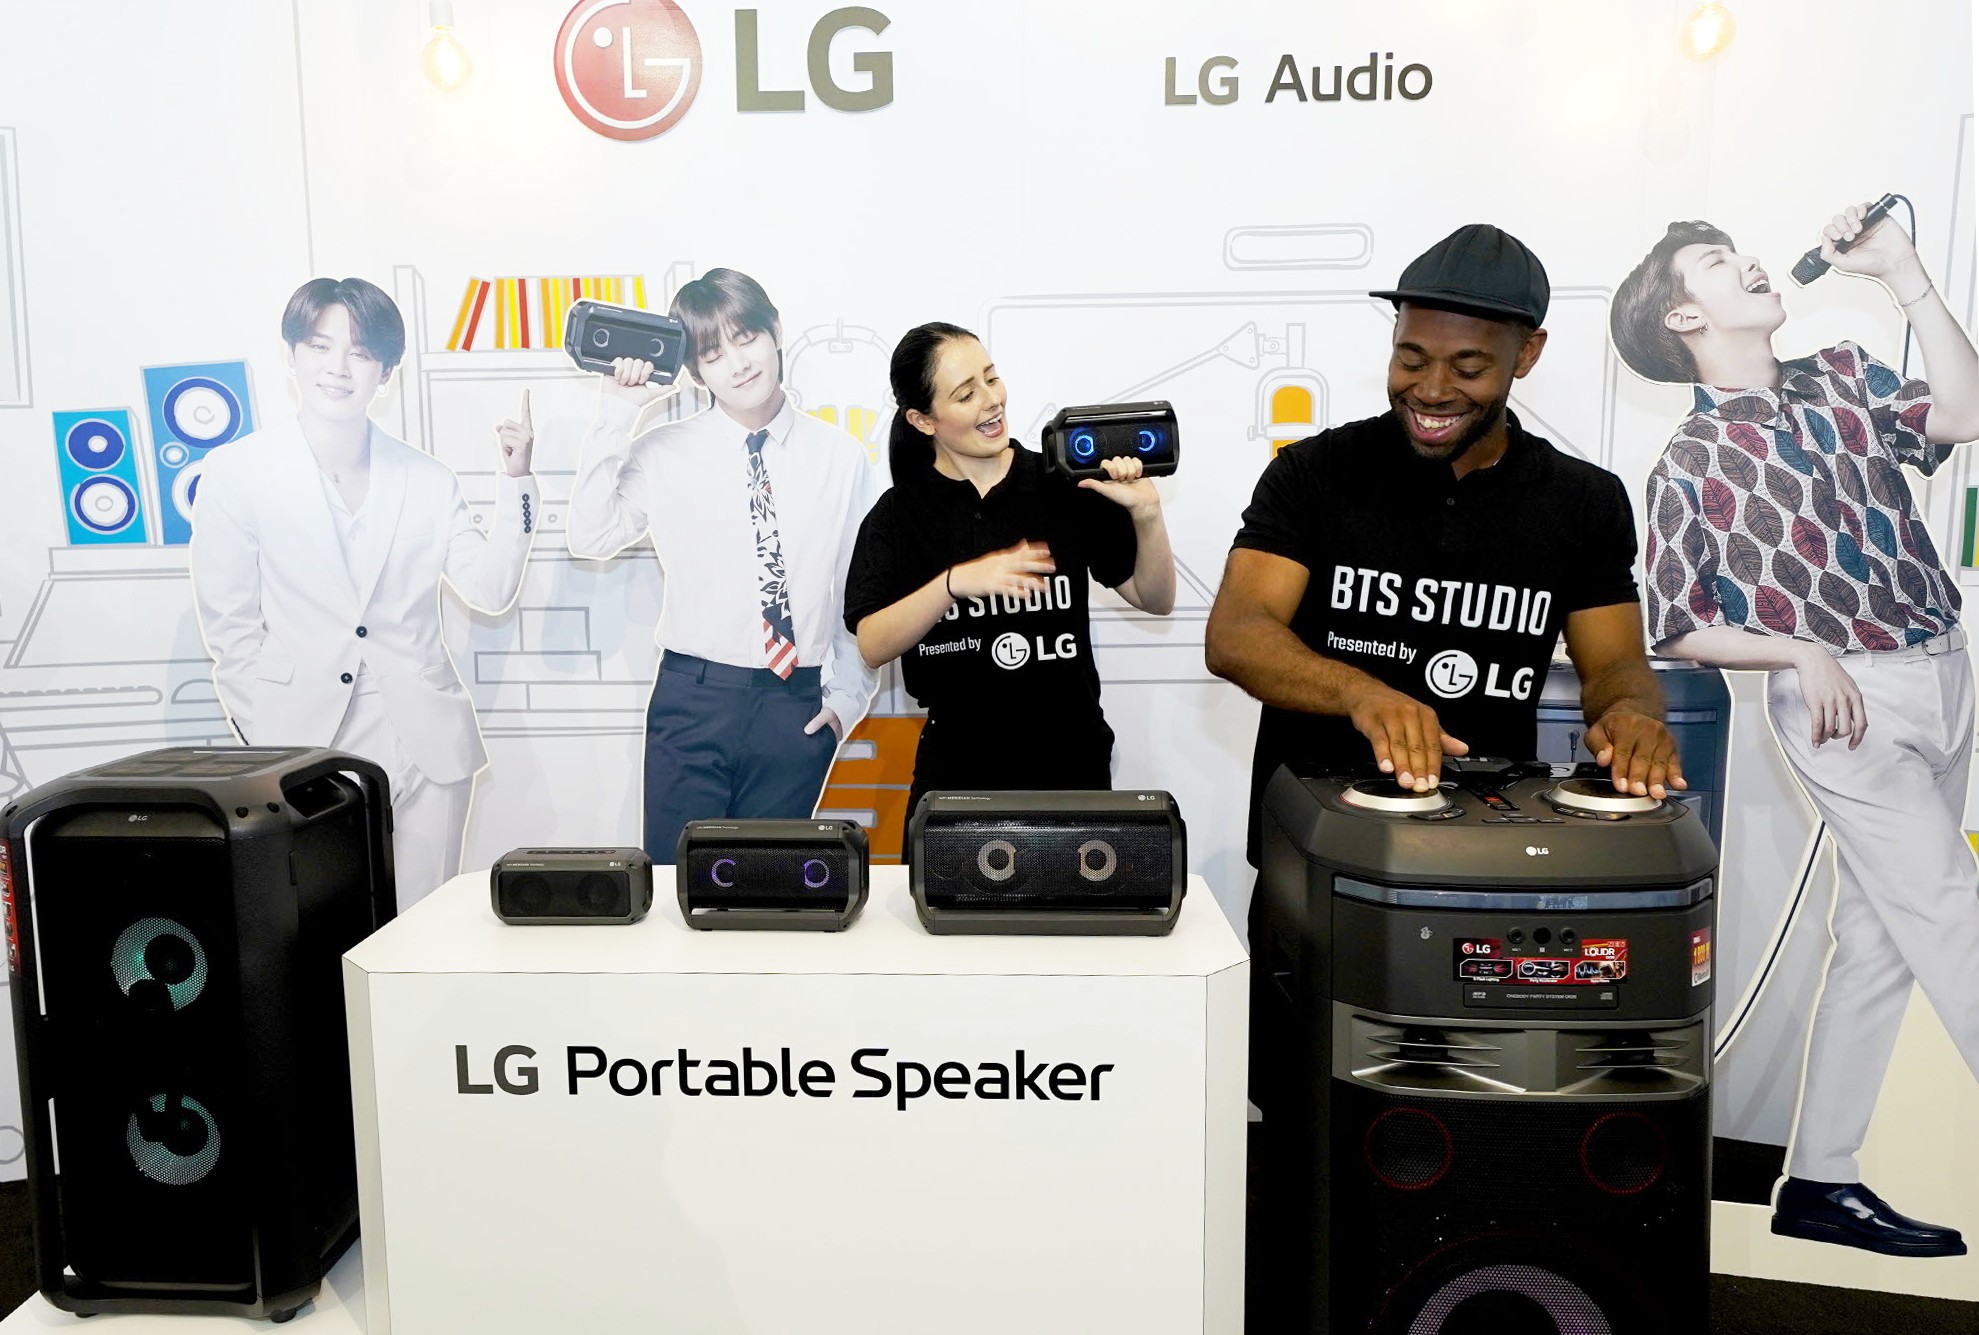 A man and woman both test LG’s speaker products at the BTS Studio Presented by LG.